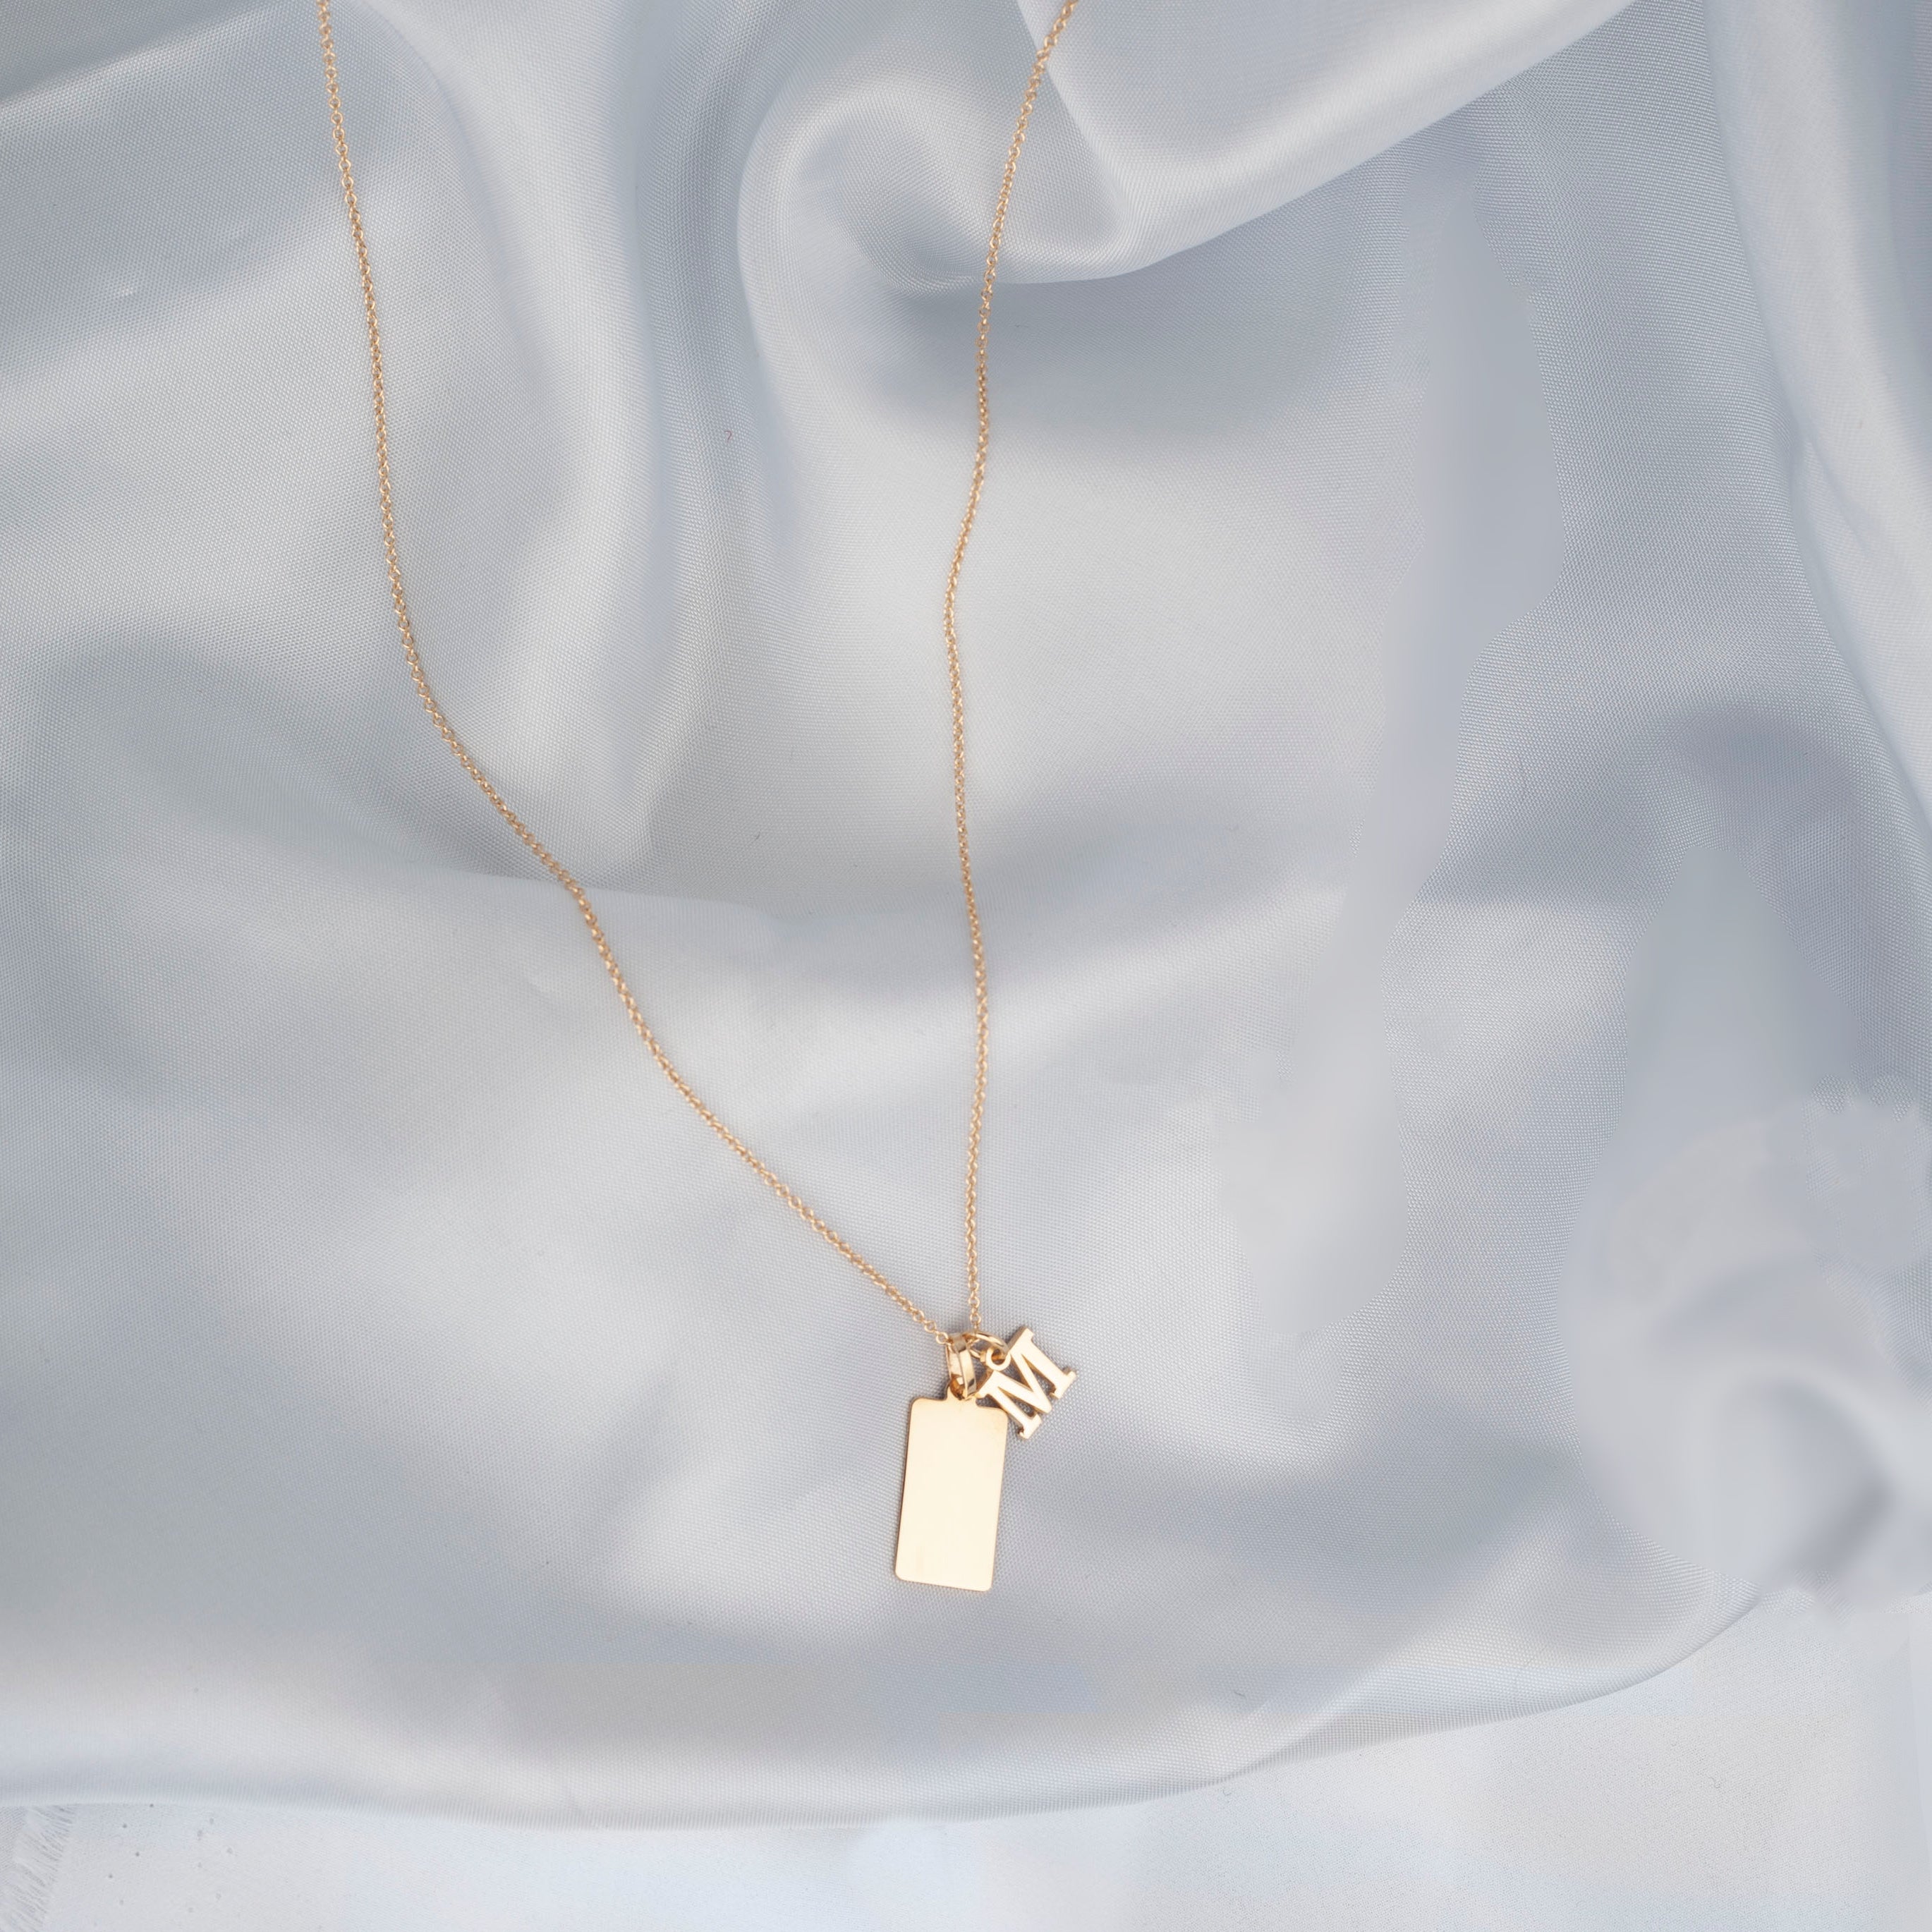 10k Gold Rectangle pendant large and small